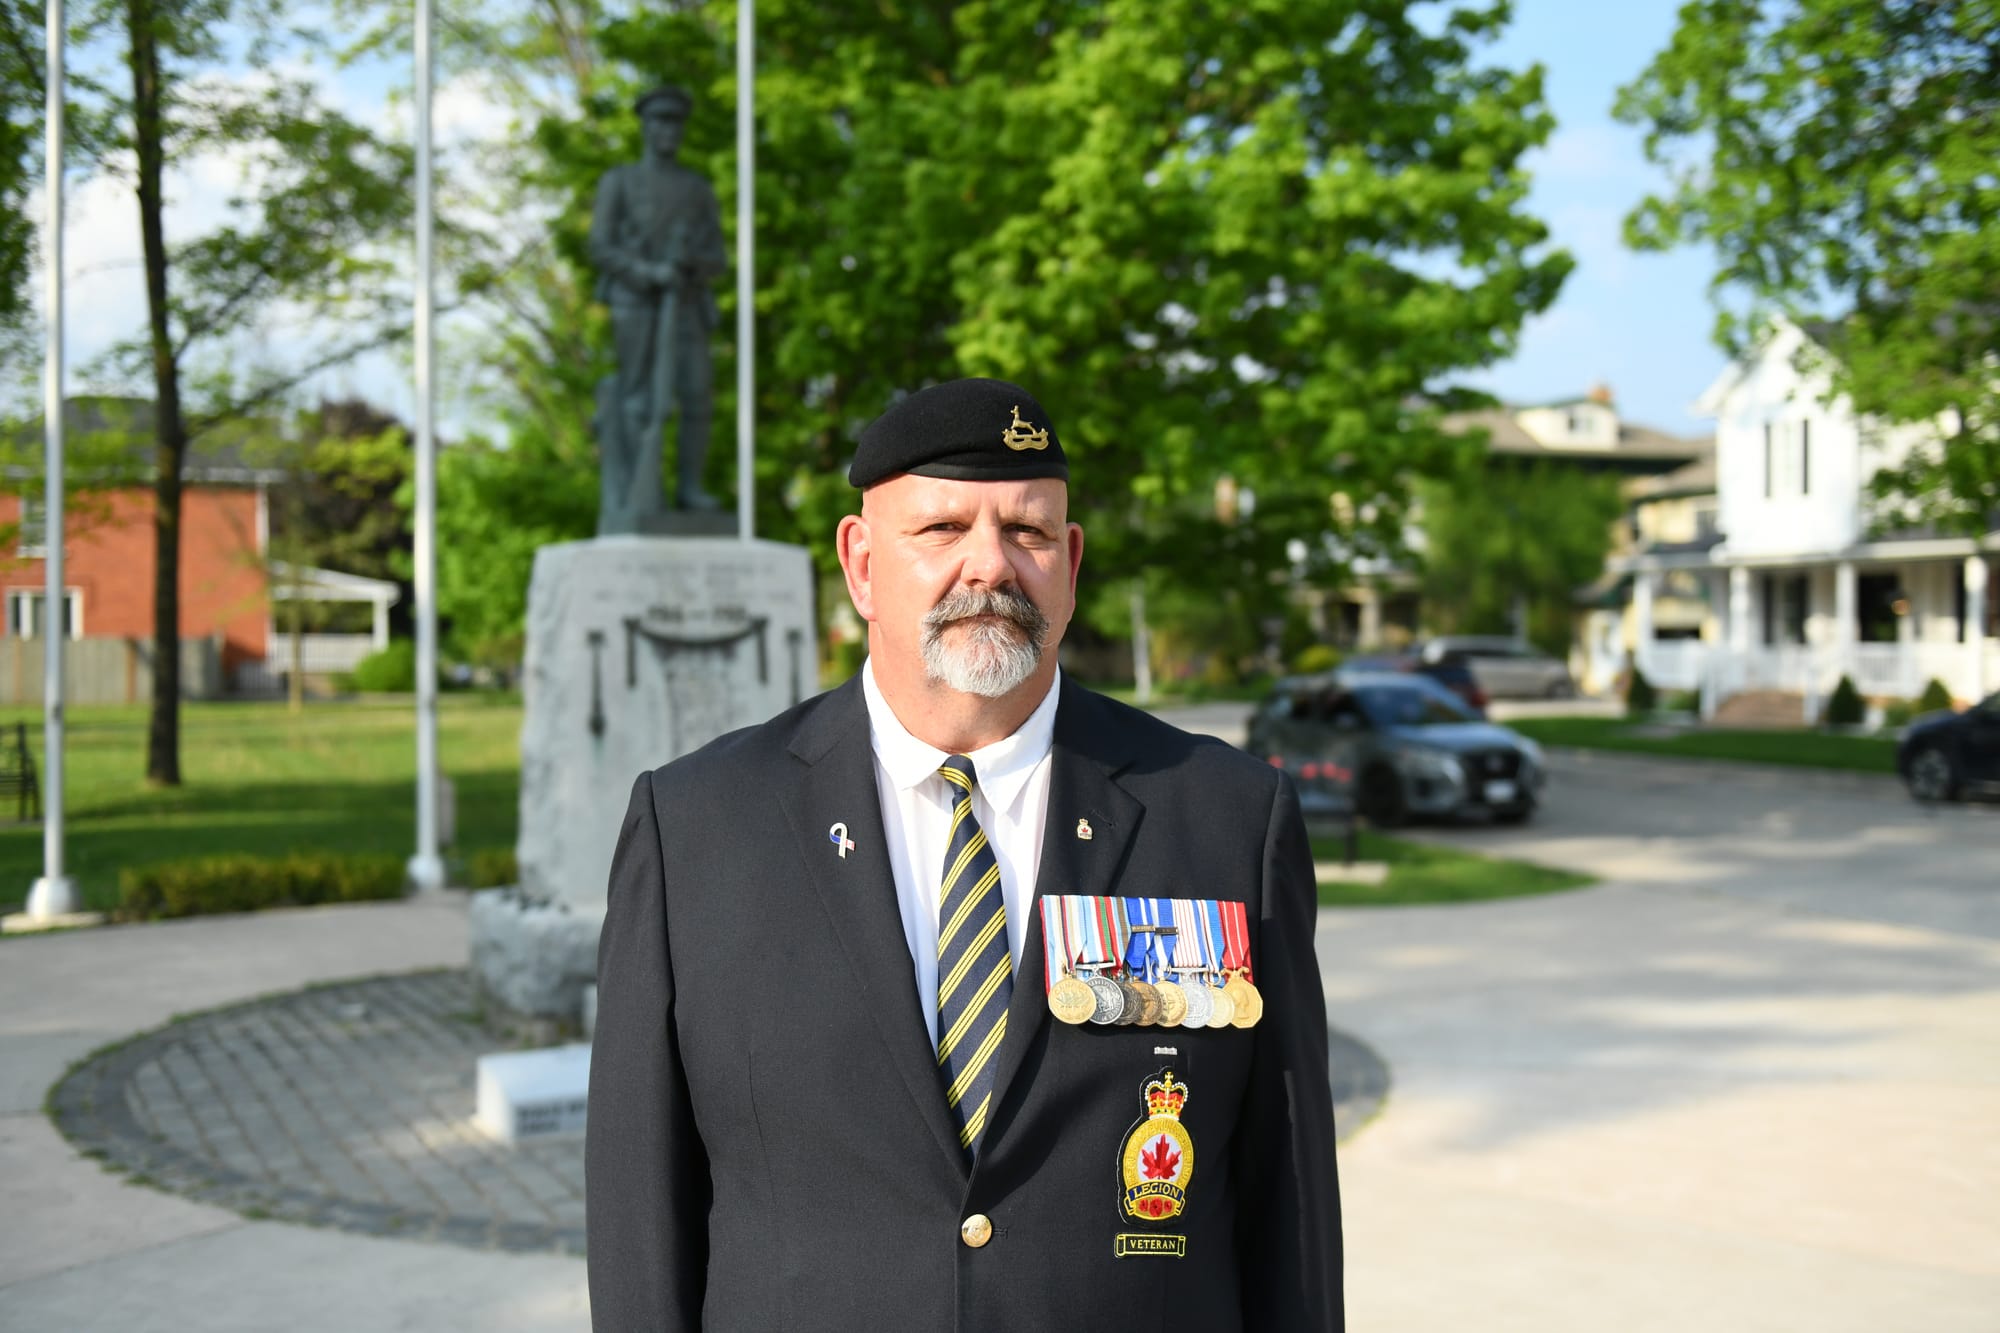 Addition to Elmira cenotaph serves as peacekeepers’ memorial